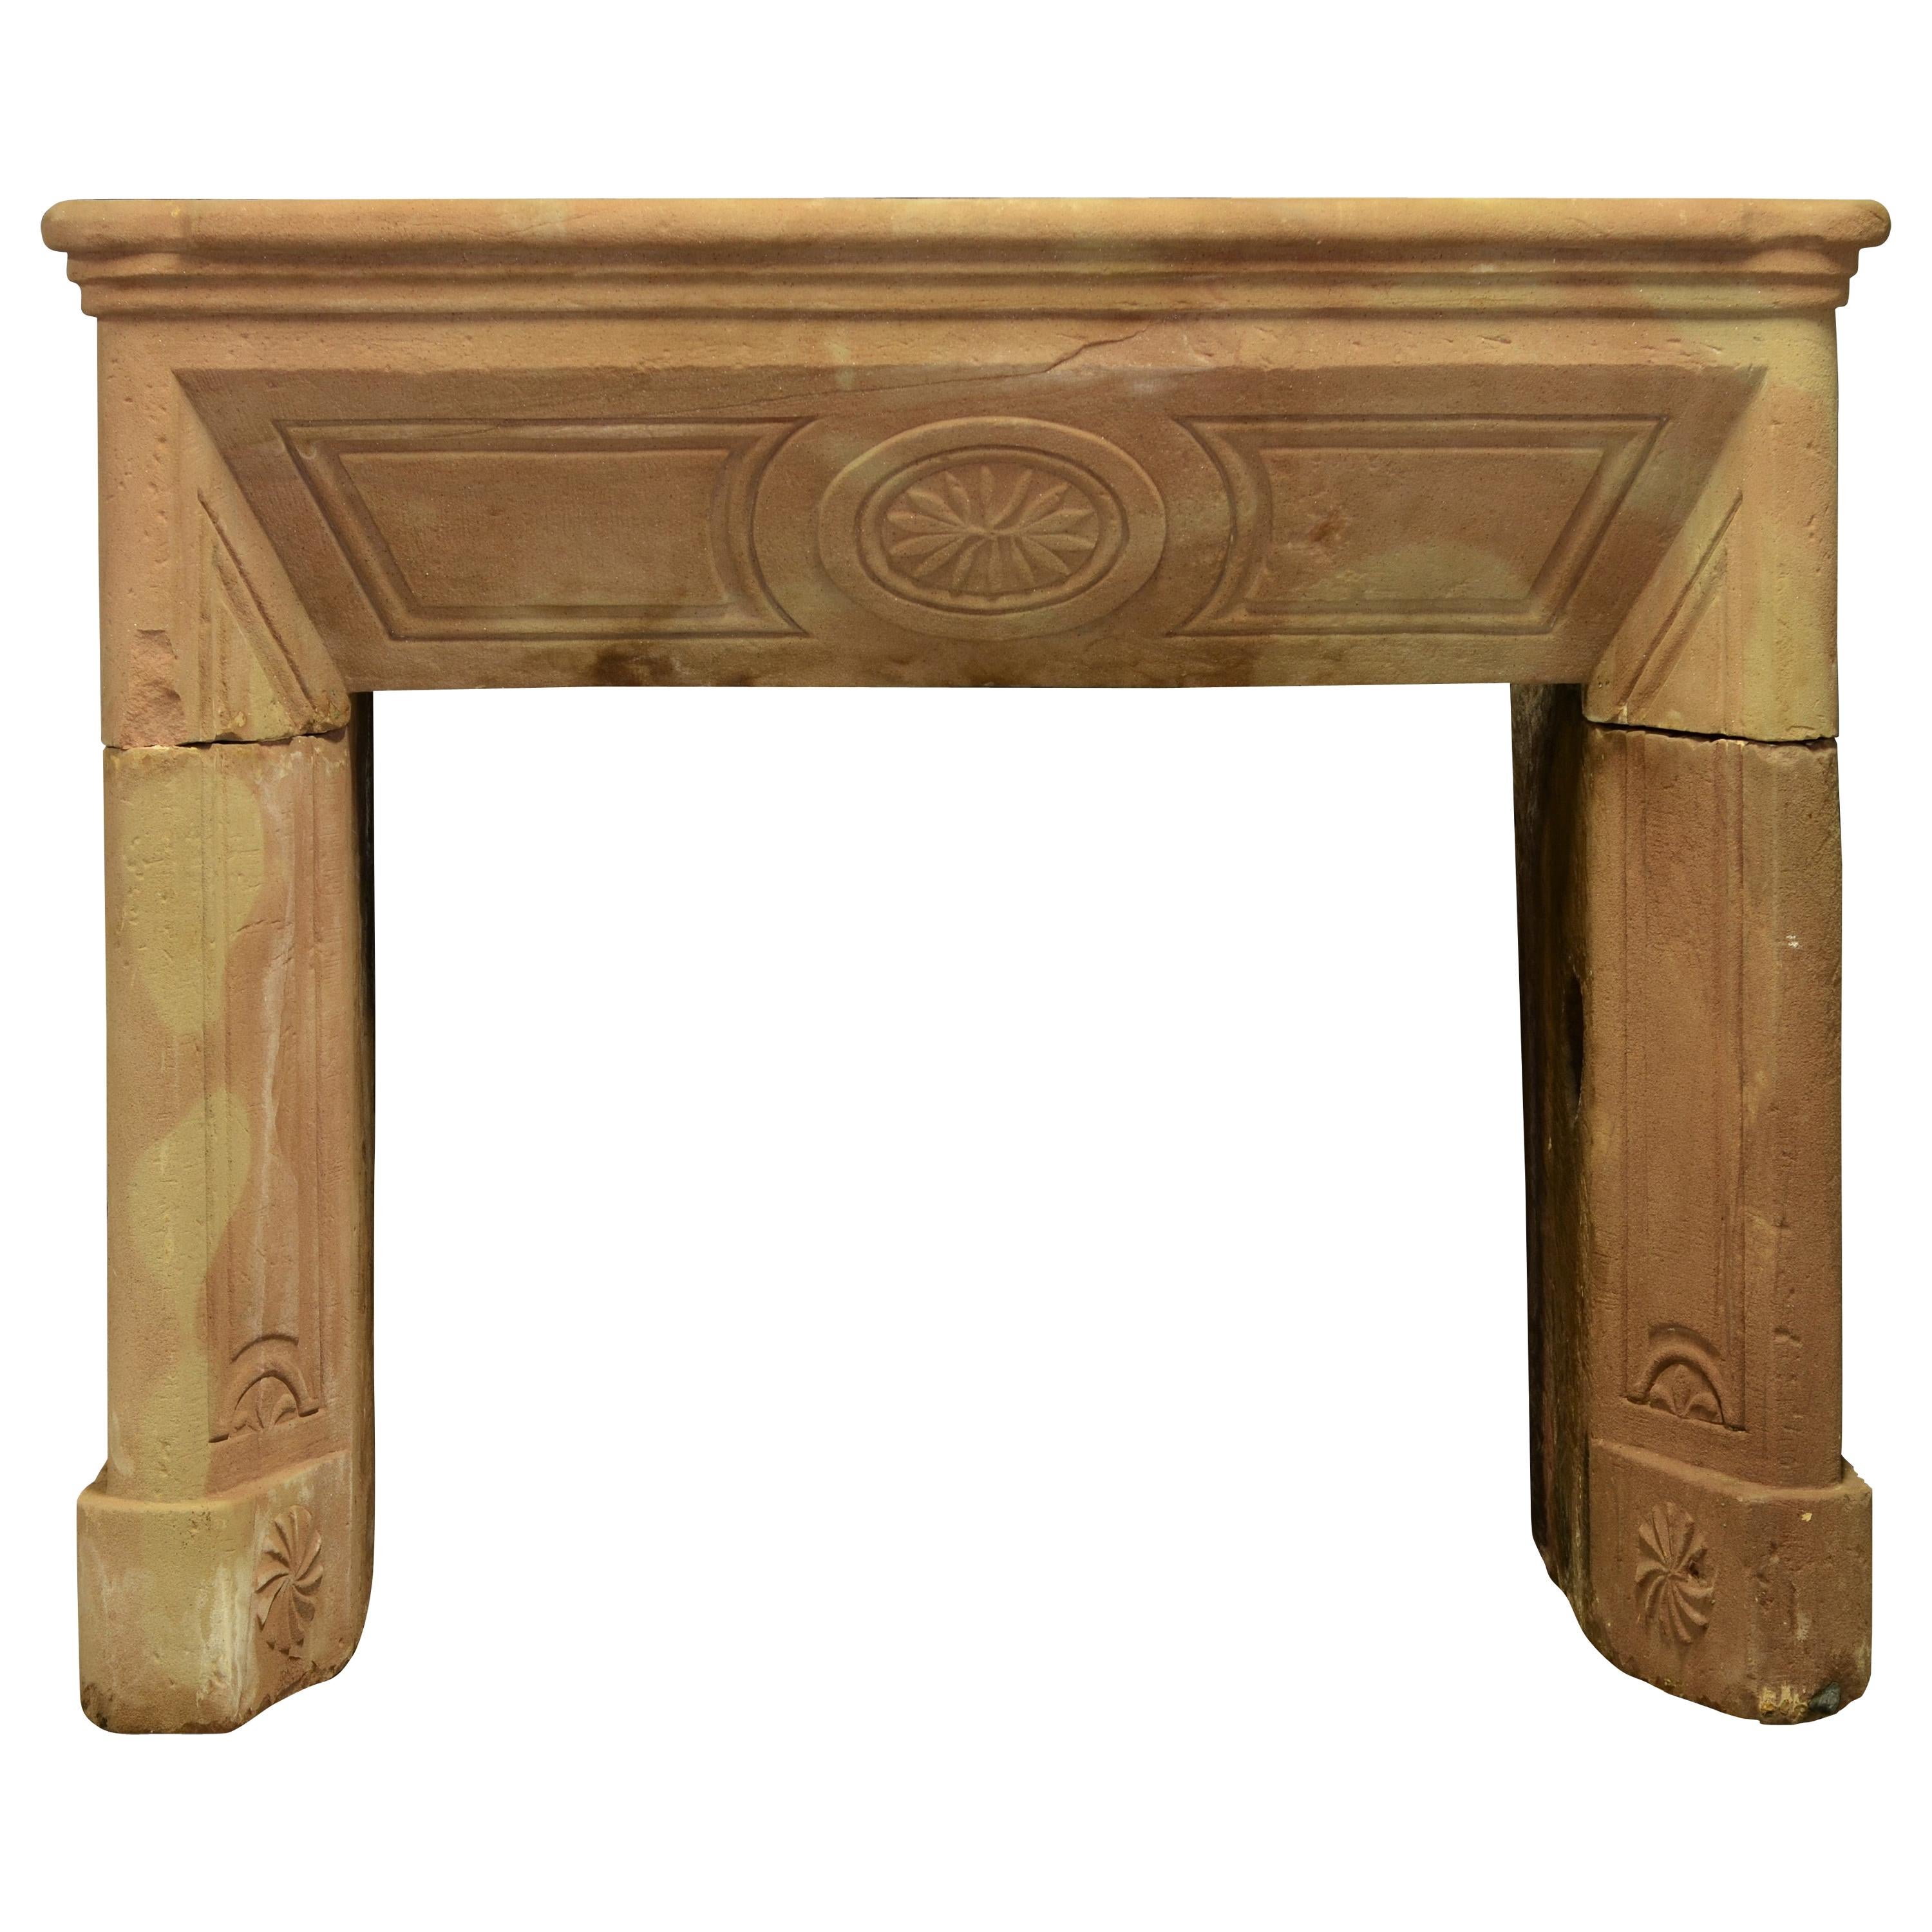 Antique French Fireplace in Sandstone